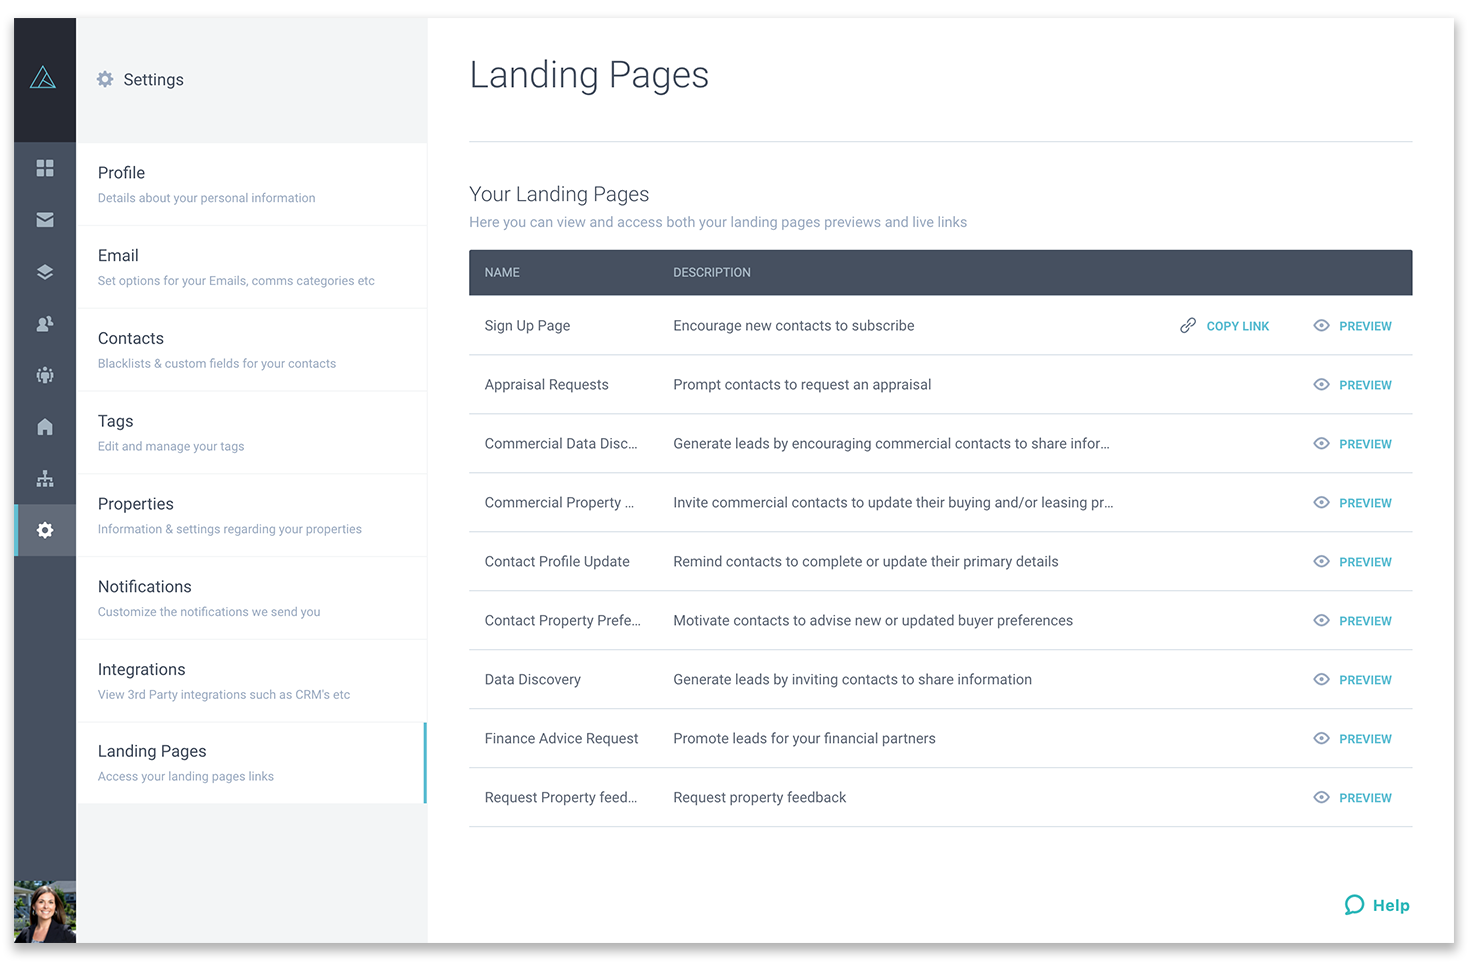 Settings_Landing_Pages.png